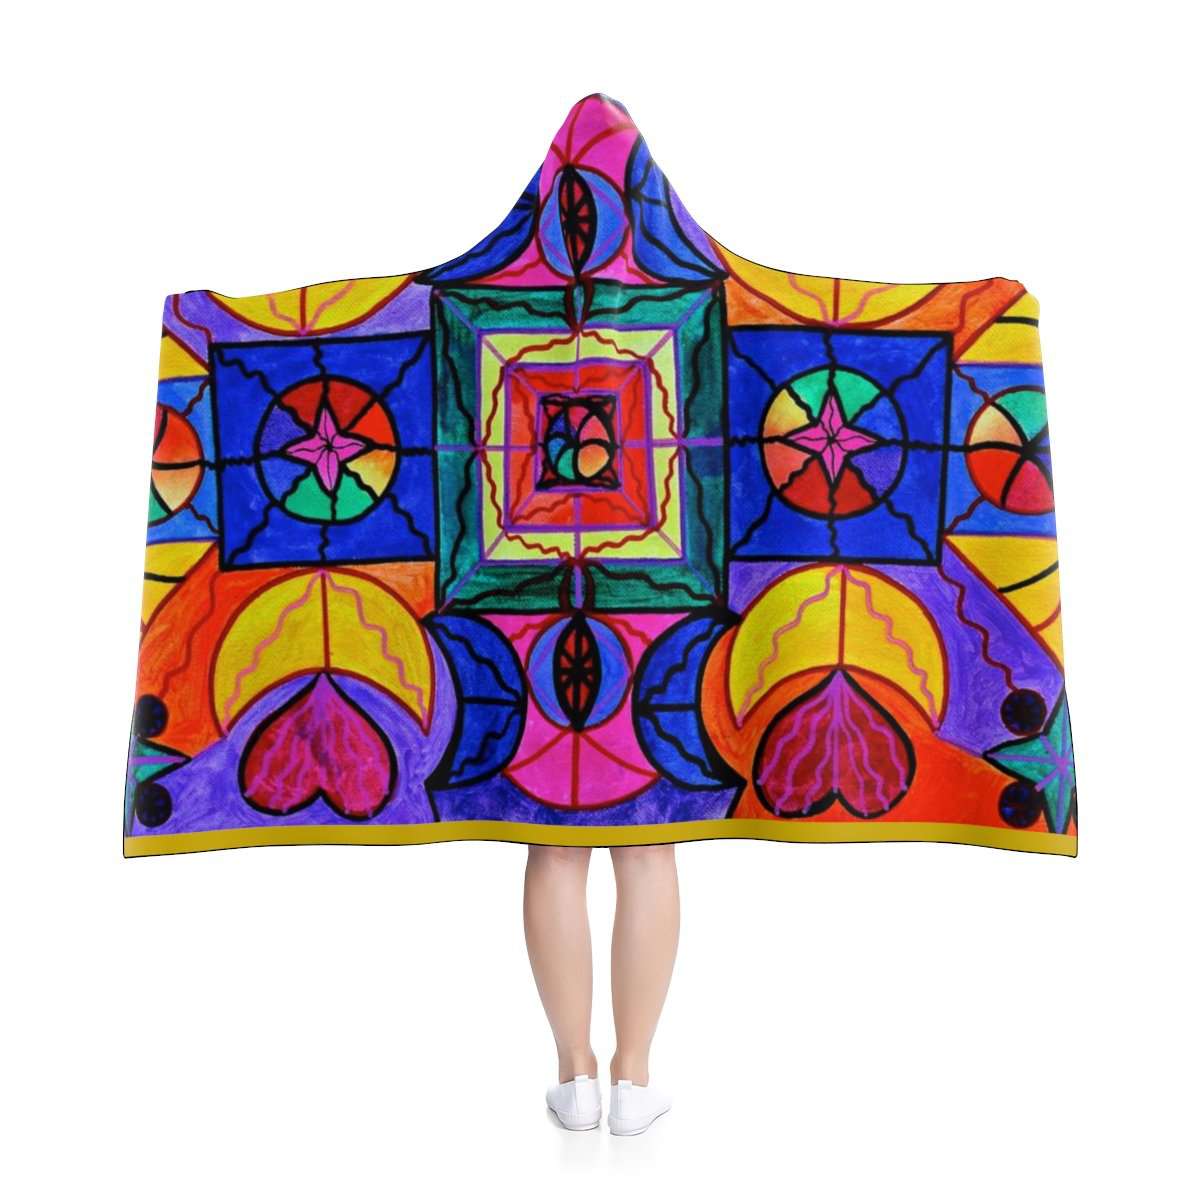 shop-the-official-online-store-of-play-hooded-blanket-online-hot-sale_0.jpg